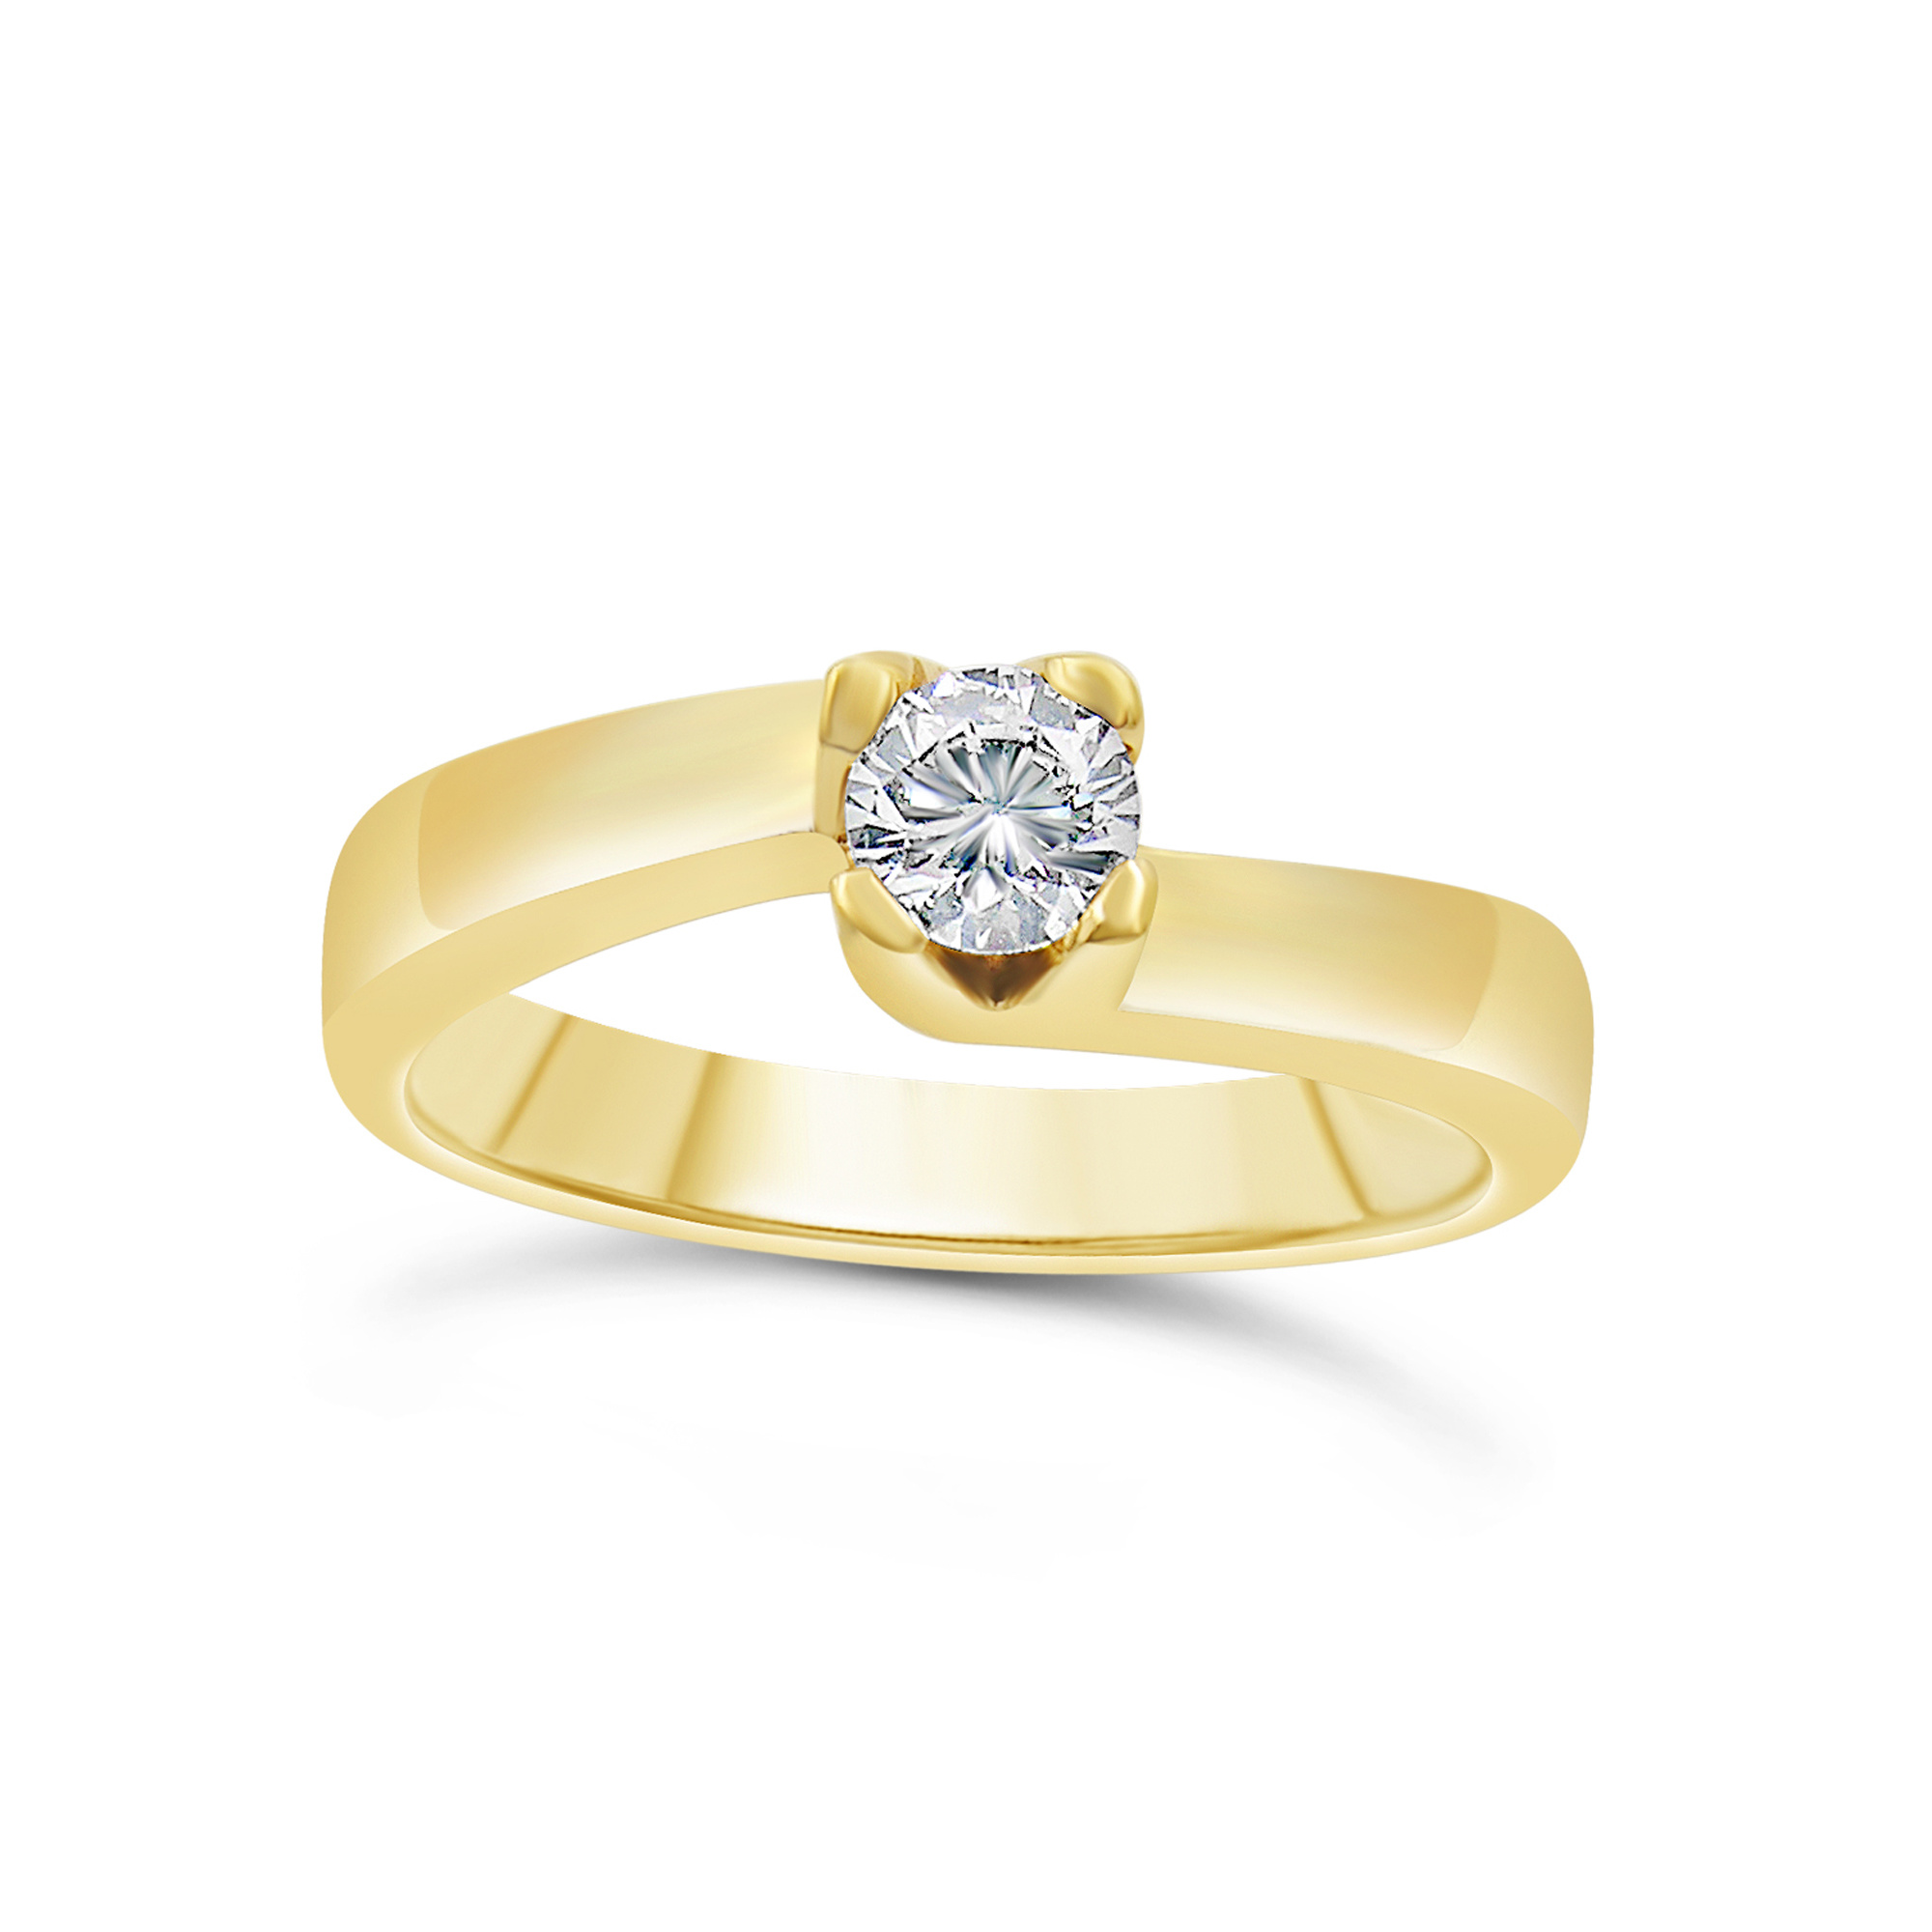 18kt yellow gold engagement ring with 0.34 ct diamond